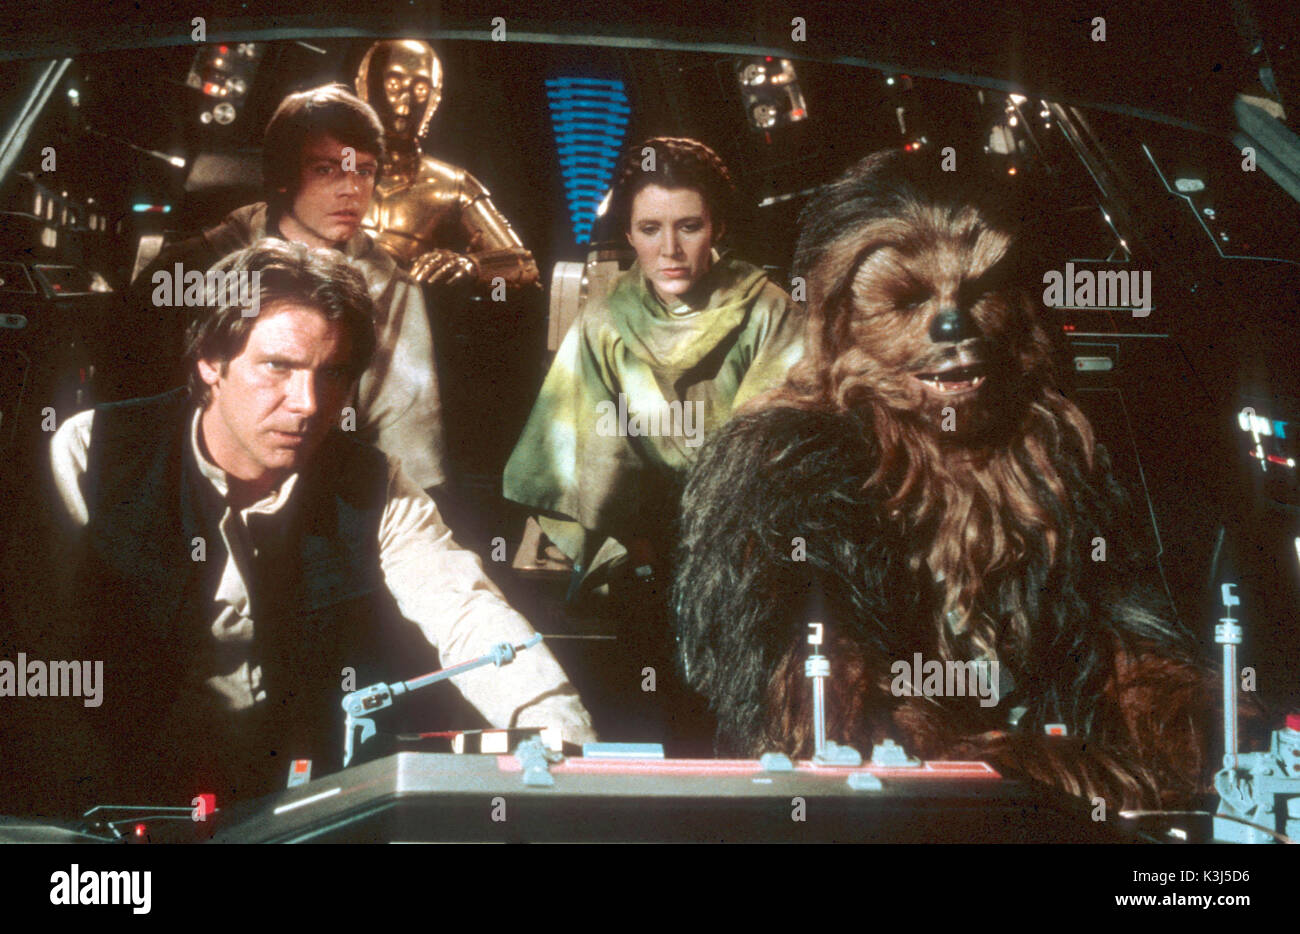 STAR WARS: EPISODE VI - RETURN OF THE JEDI HARRISON FORD as Han Solo, MARK HAMILL as Luke Skywalker, ANTHONY DANIELS as C-3PO, CARRIE FISHER as Princess Leia, PETER MAYHEW as Chewbacca     Date: 1983 Stock Photo